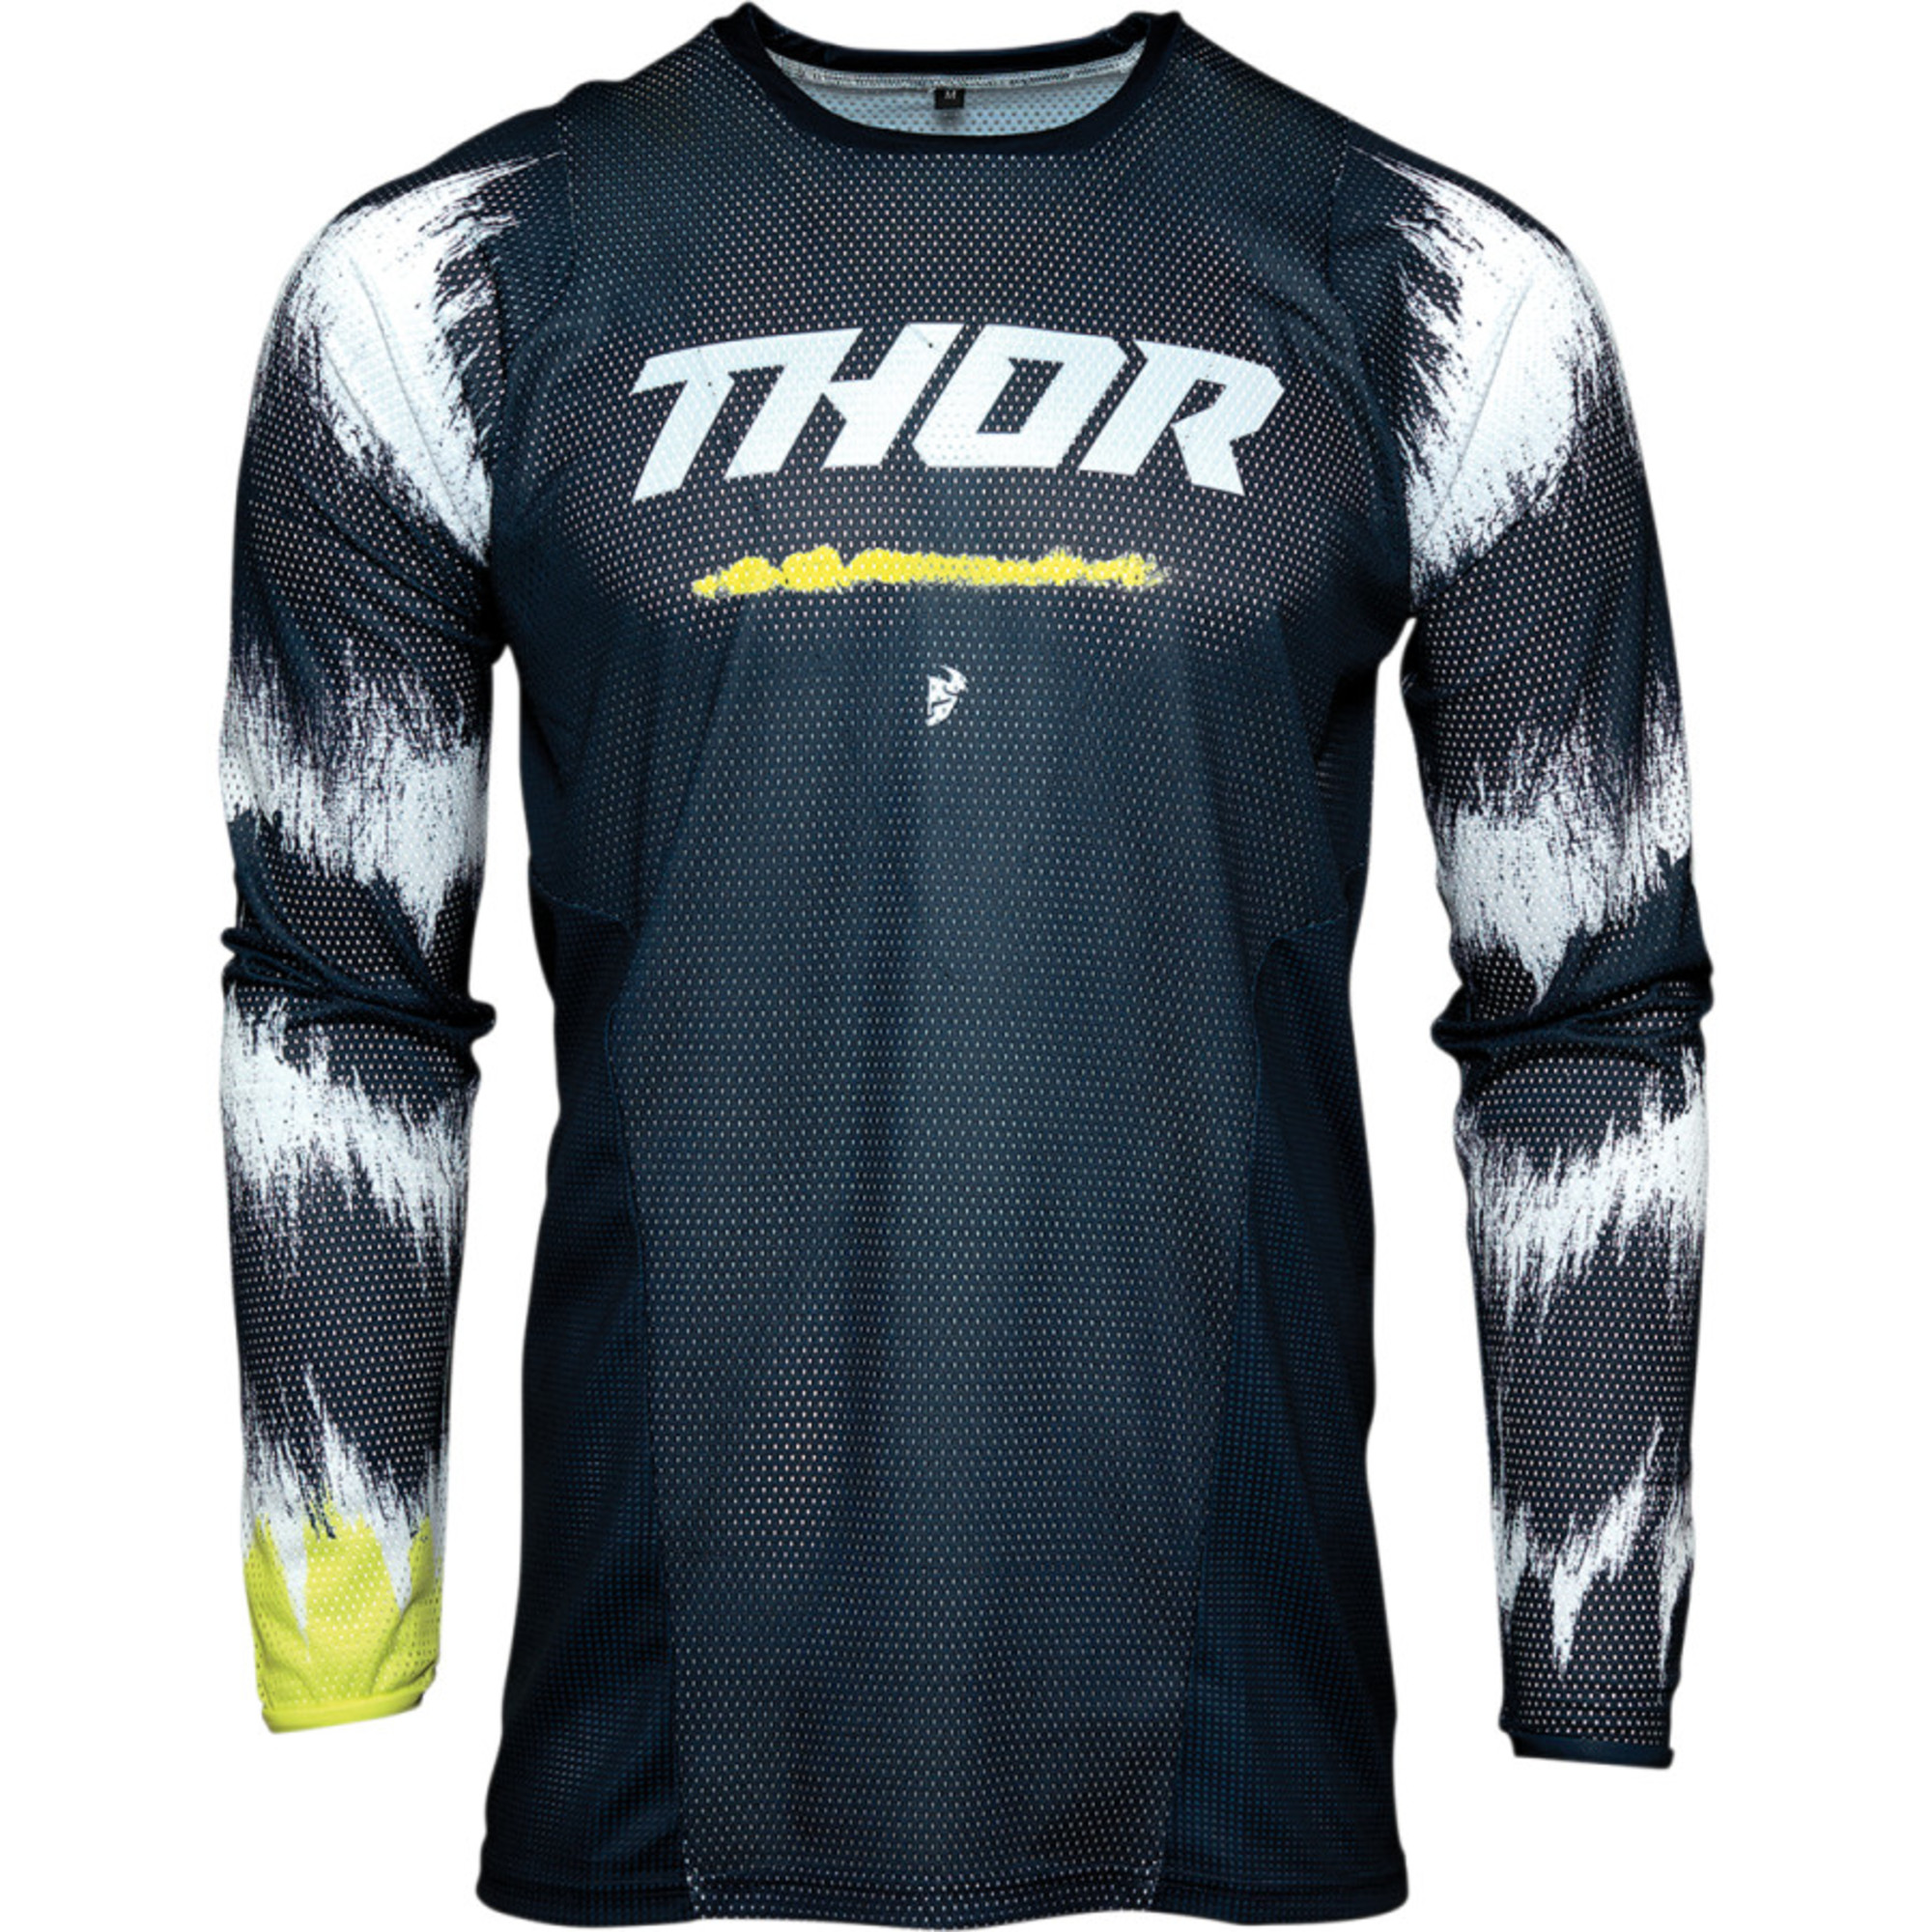 thor jerseys for kids pulse air rad